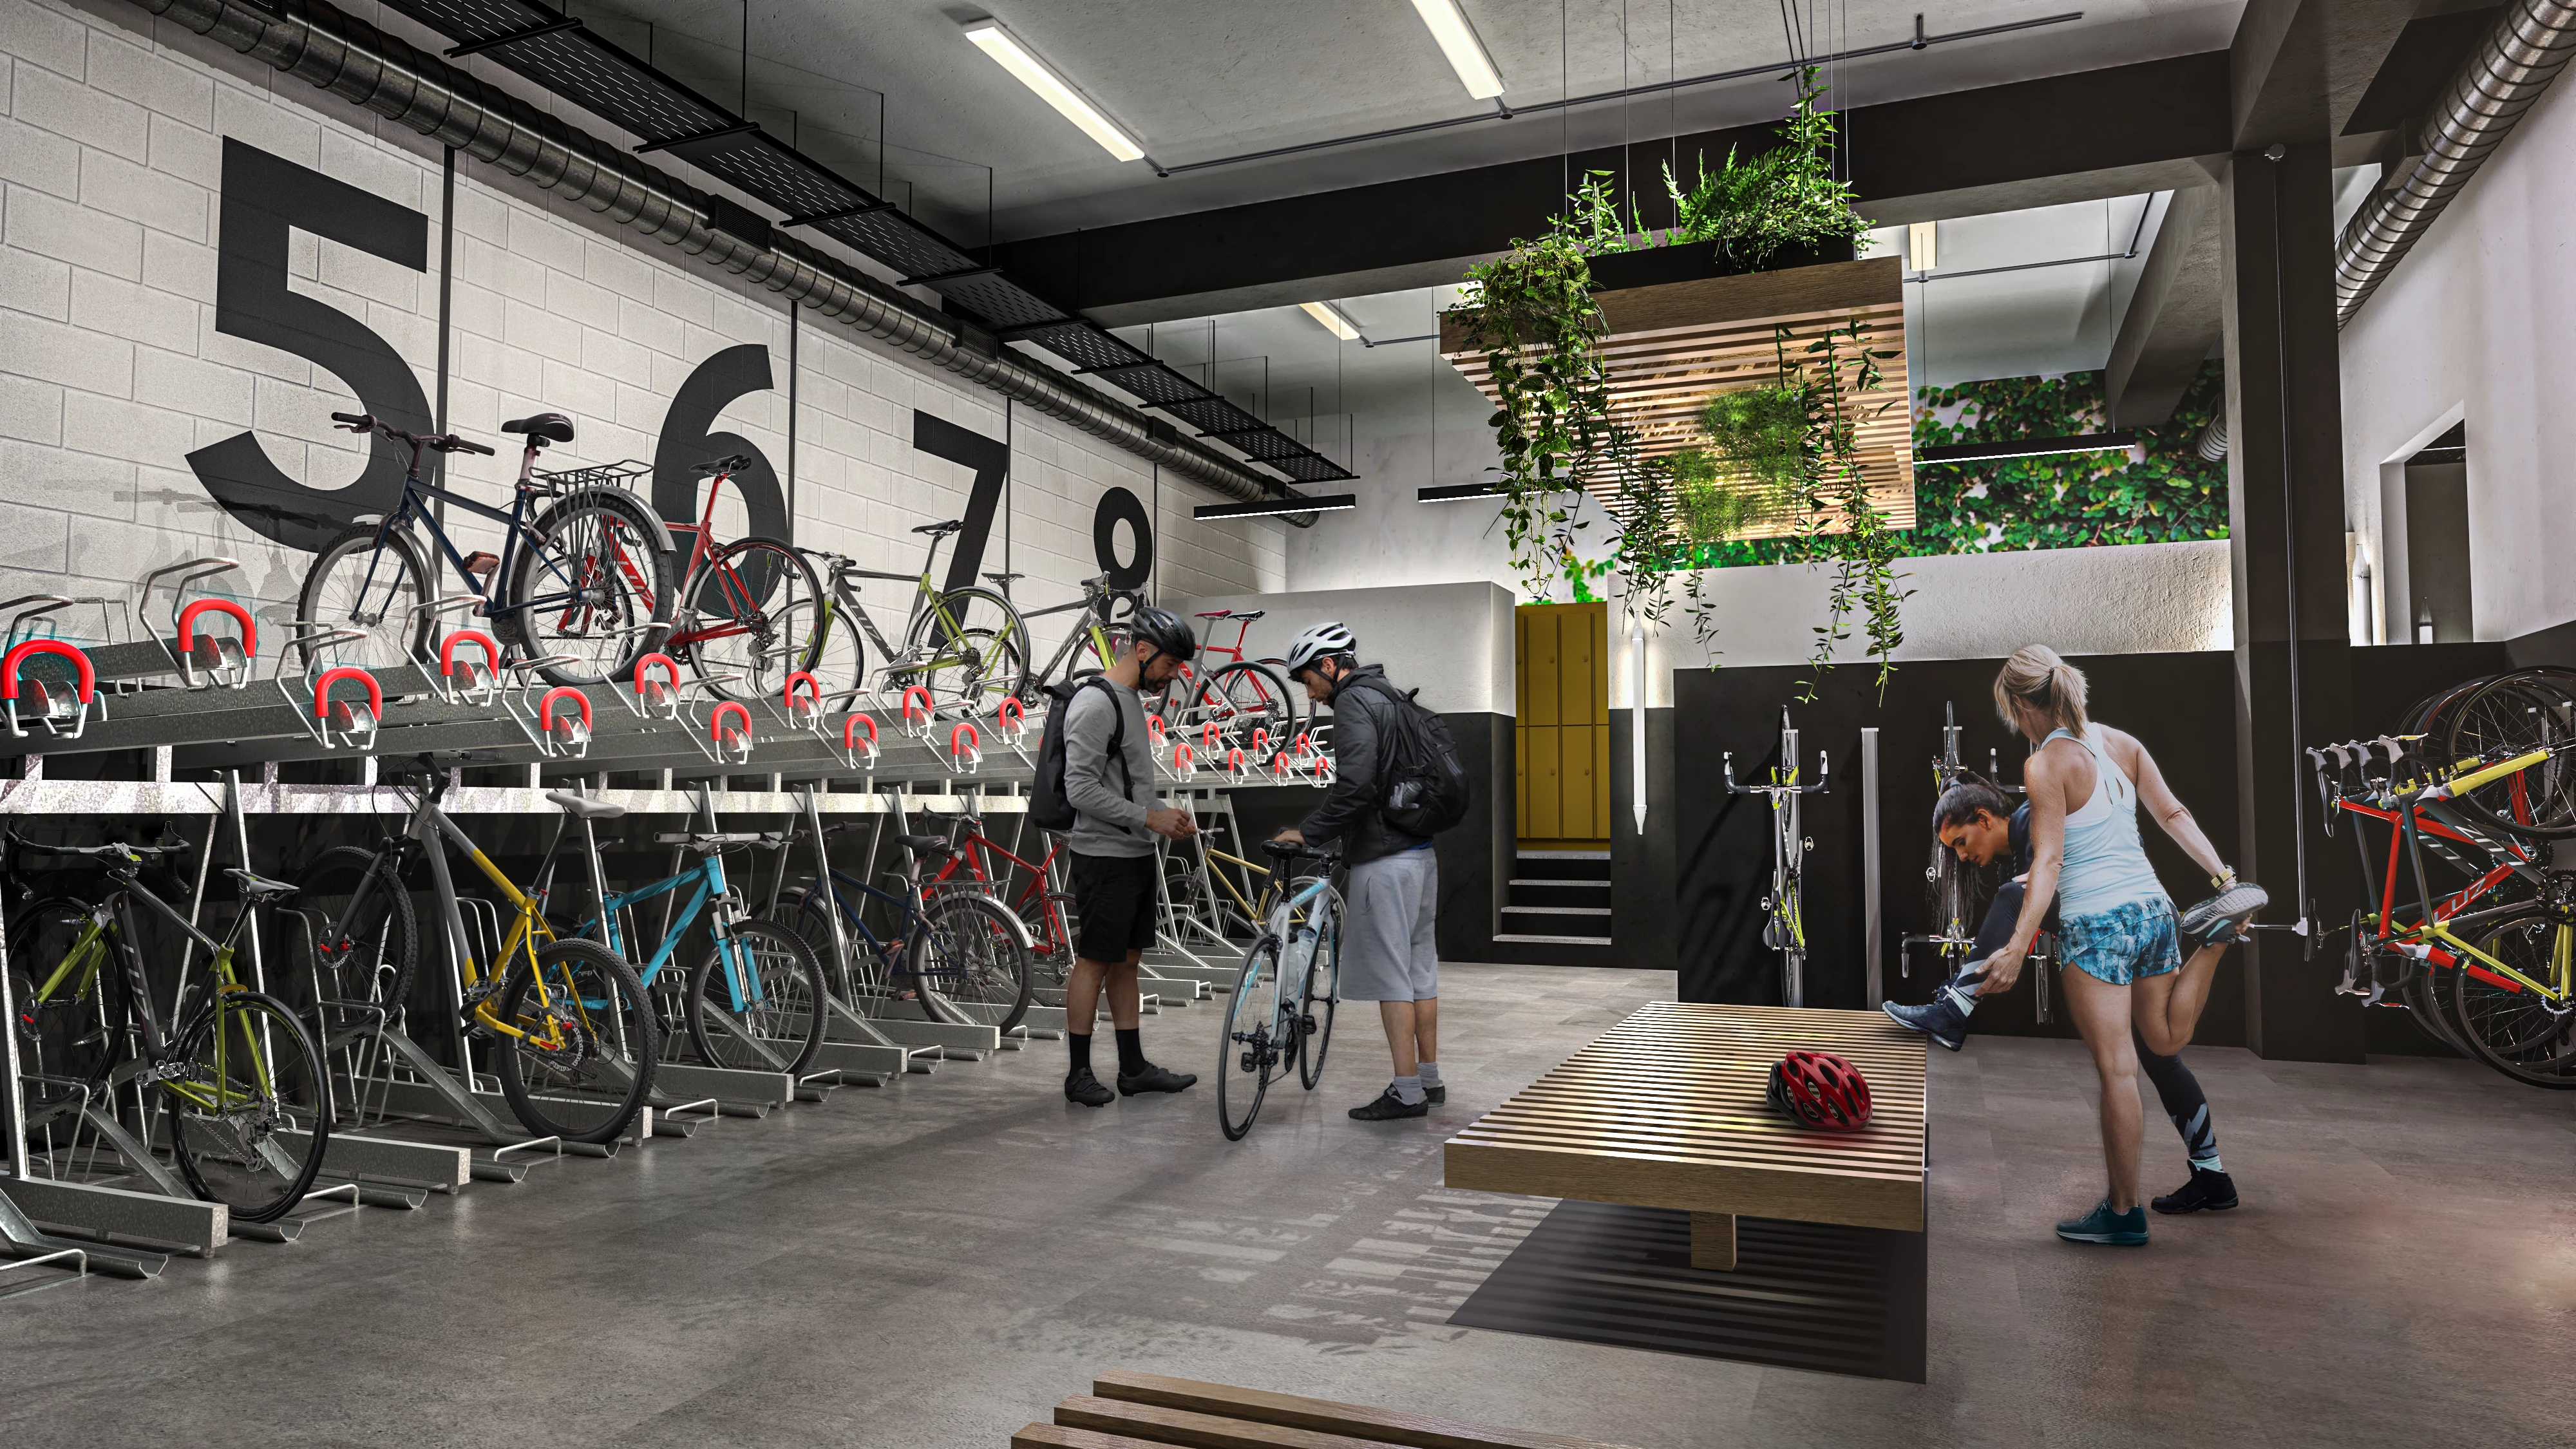 The new Alderley Park Cycle Store designed by architects Hamer Way